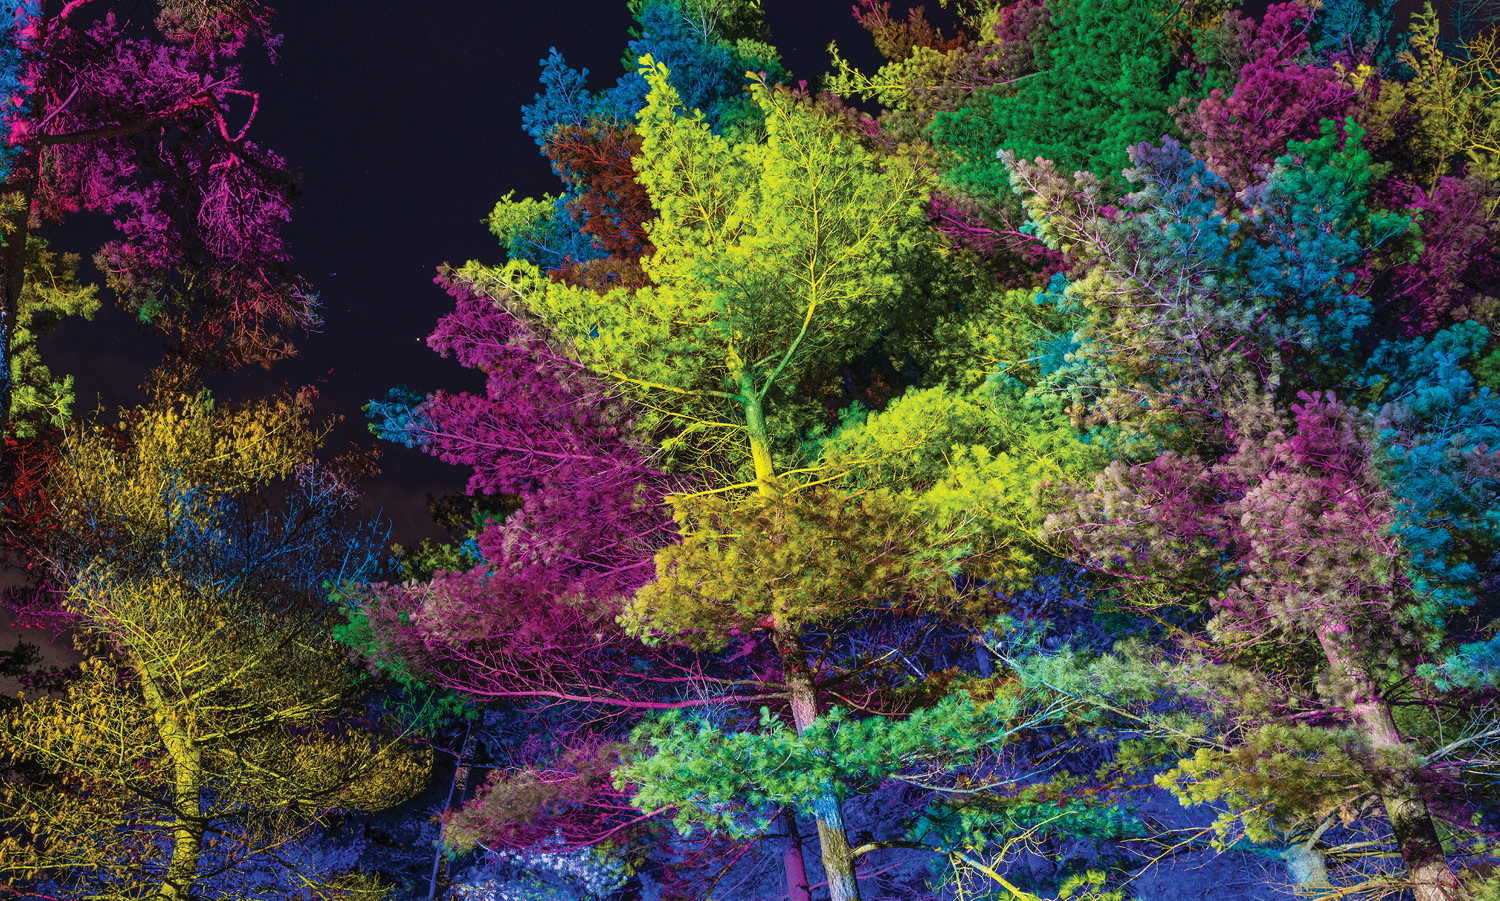 Picture of trees at the Morton Arboretum. The trees are lit up and appear to be in shades of blues, greens, and pinks.